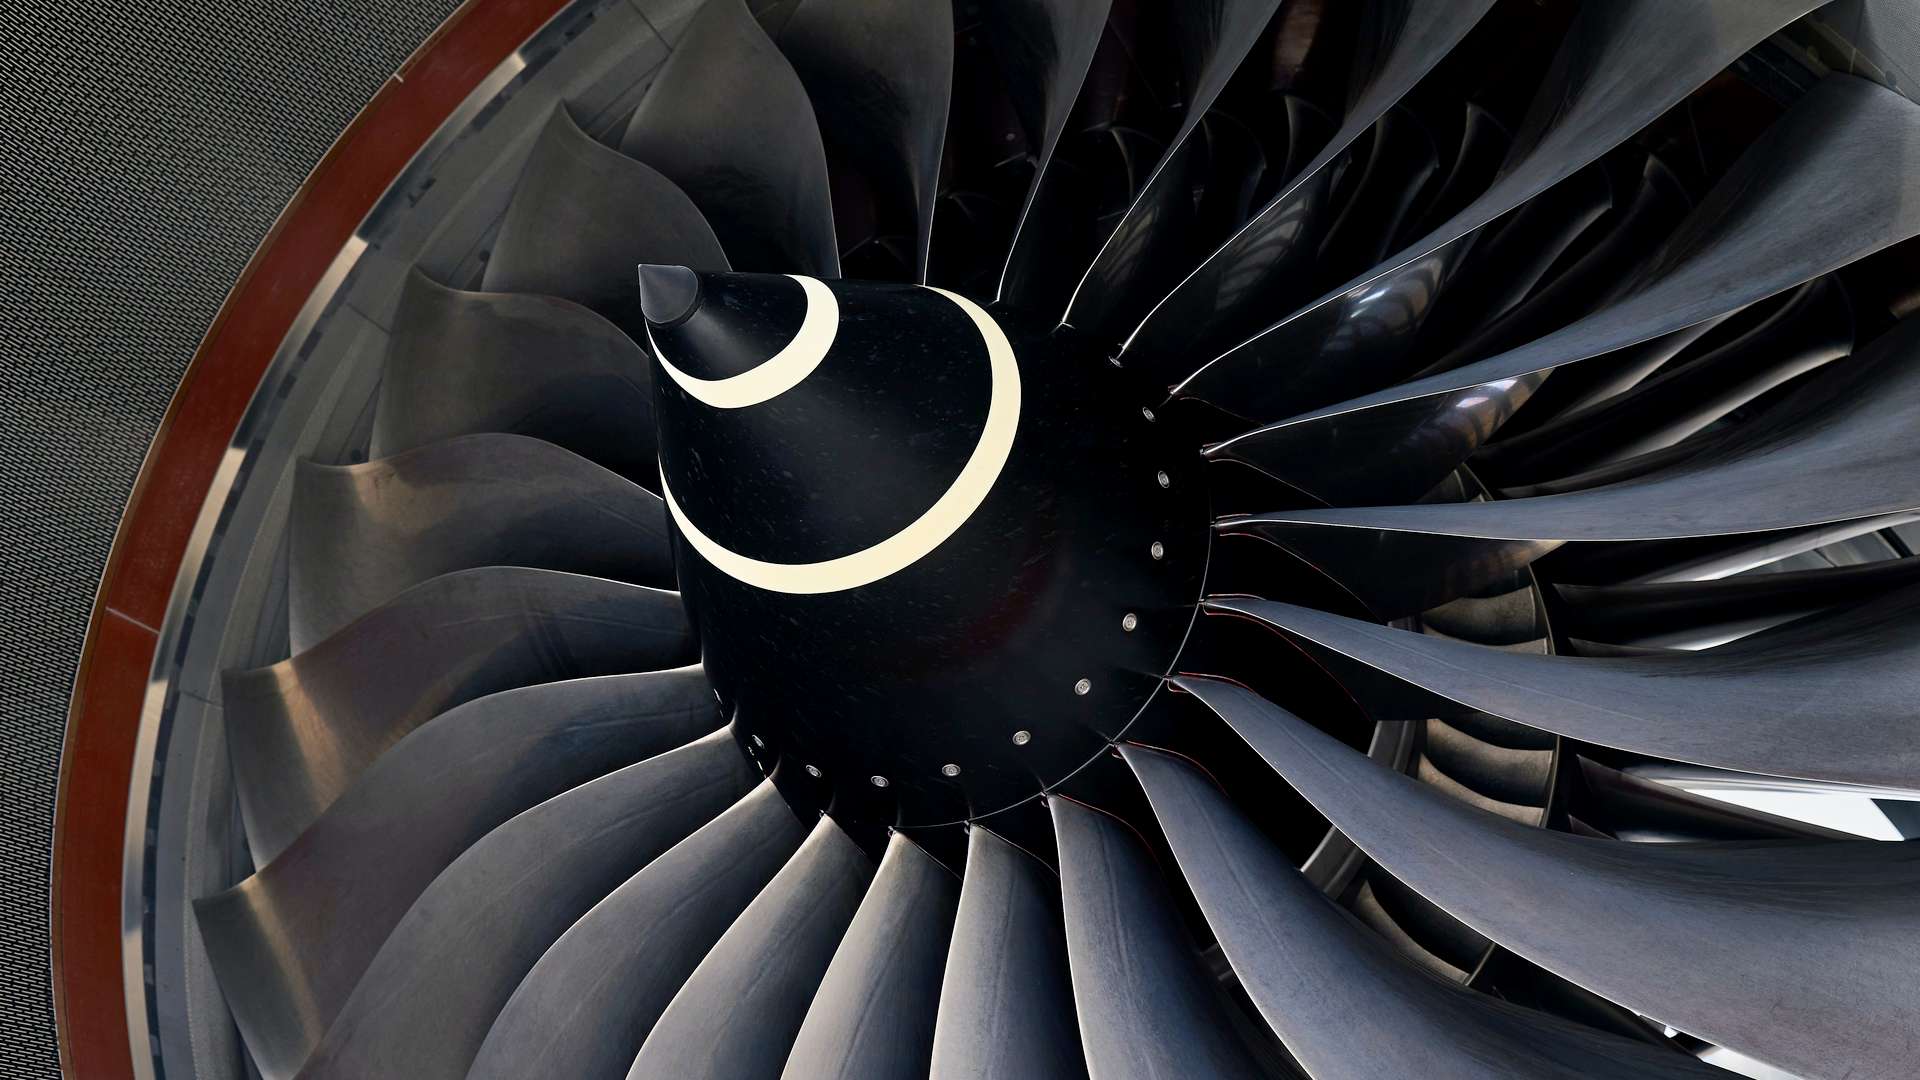 Rolls-Royce Uses UltraFan Tech To Upgrade Trent Engines